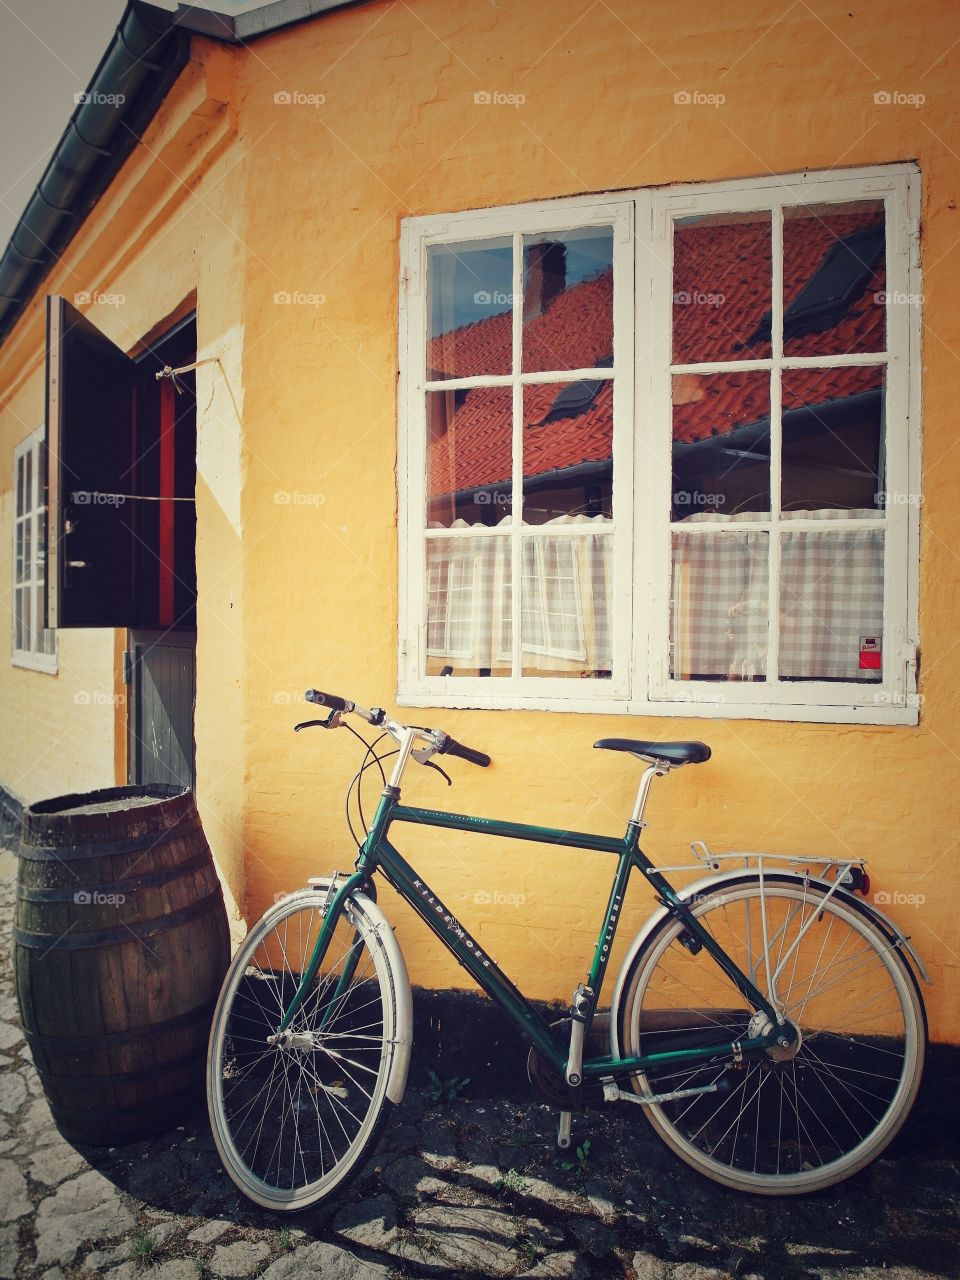 A charming house and its stylish window. 
Photo taken in Bornholm